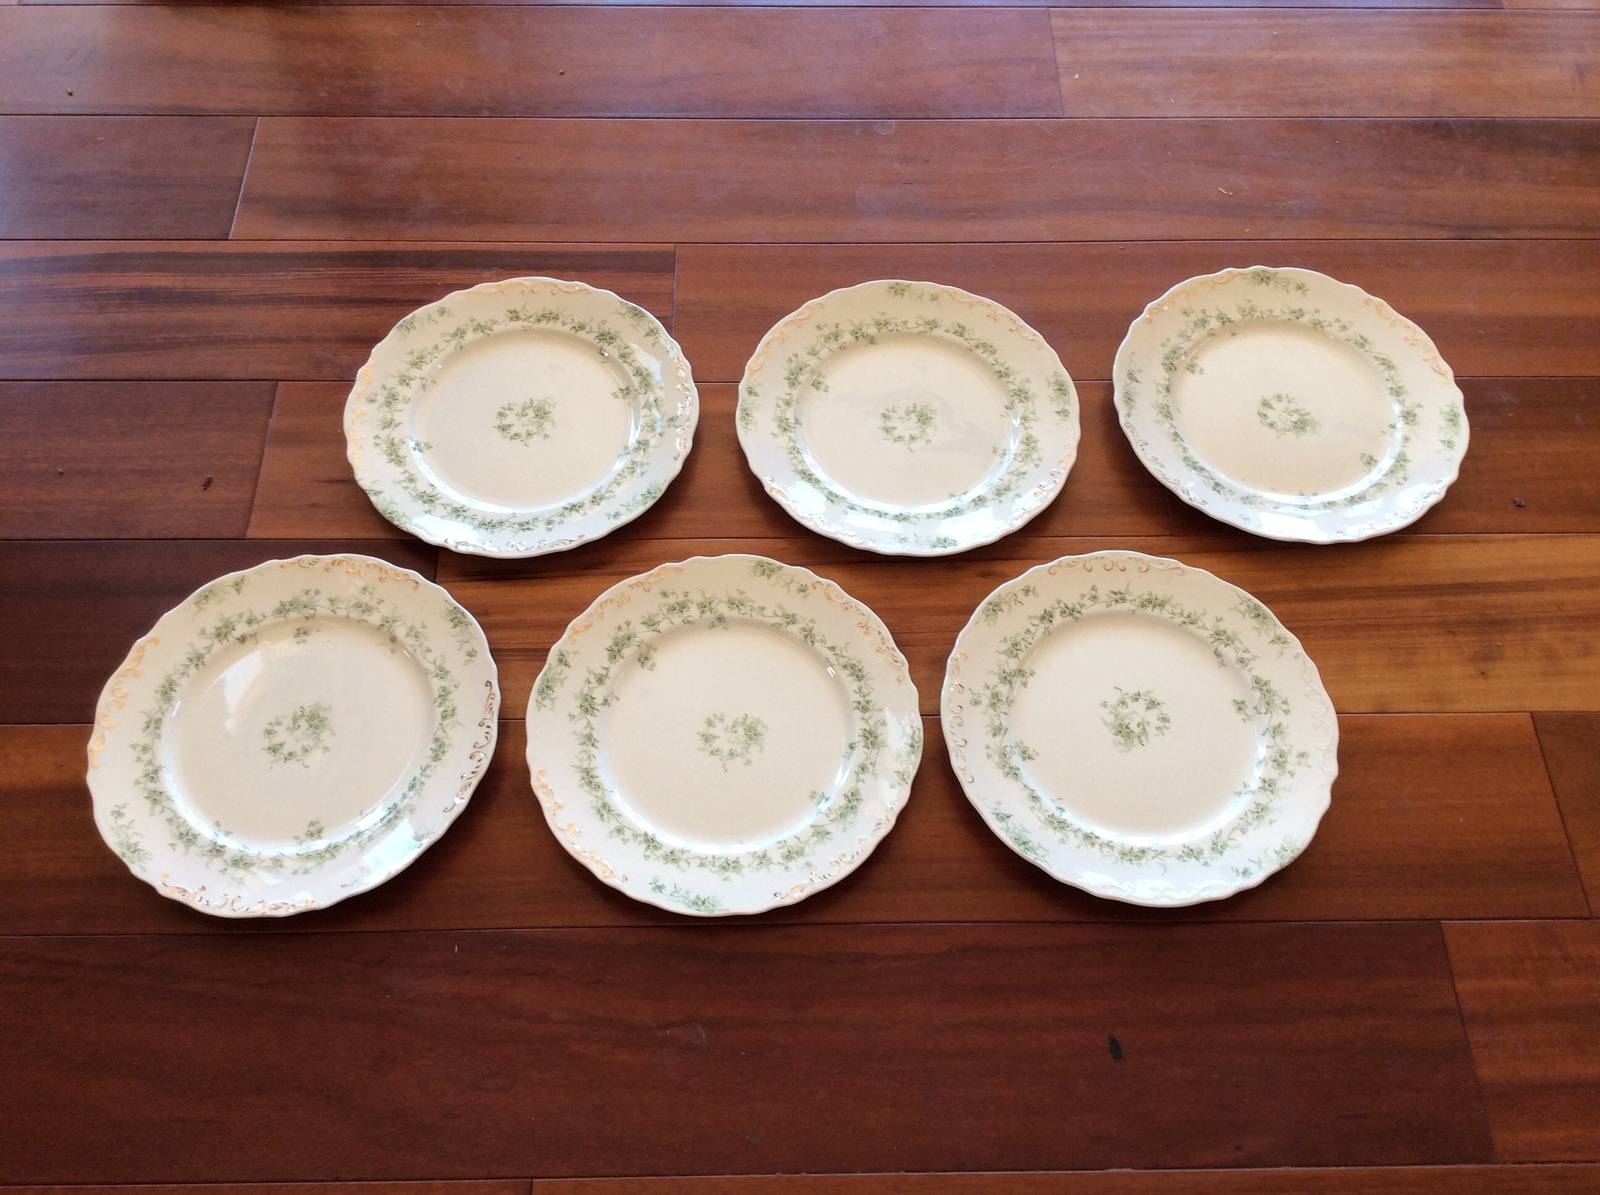 LUCERNE T & R Boote Waterloo Potteries Dishes (6) - $49.00